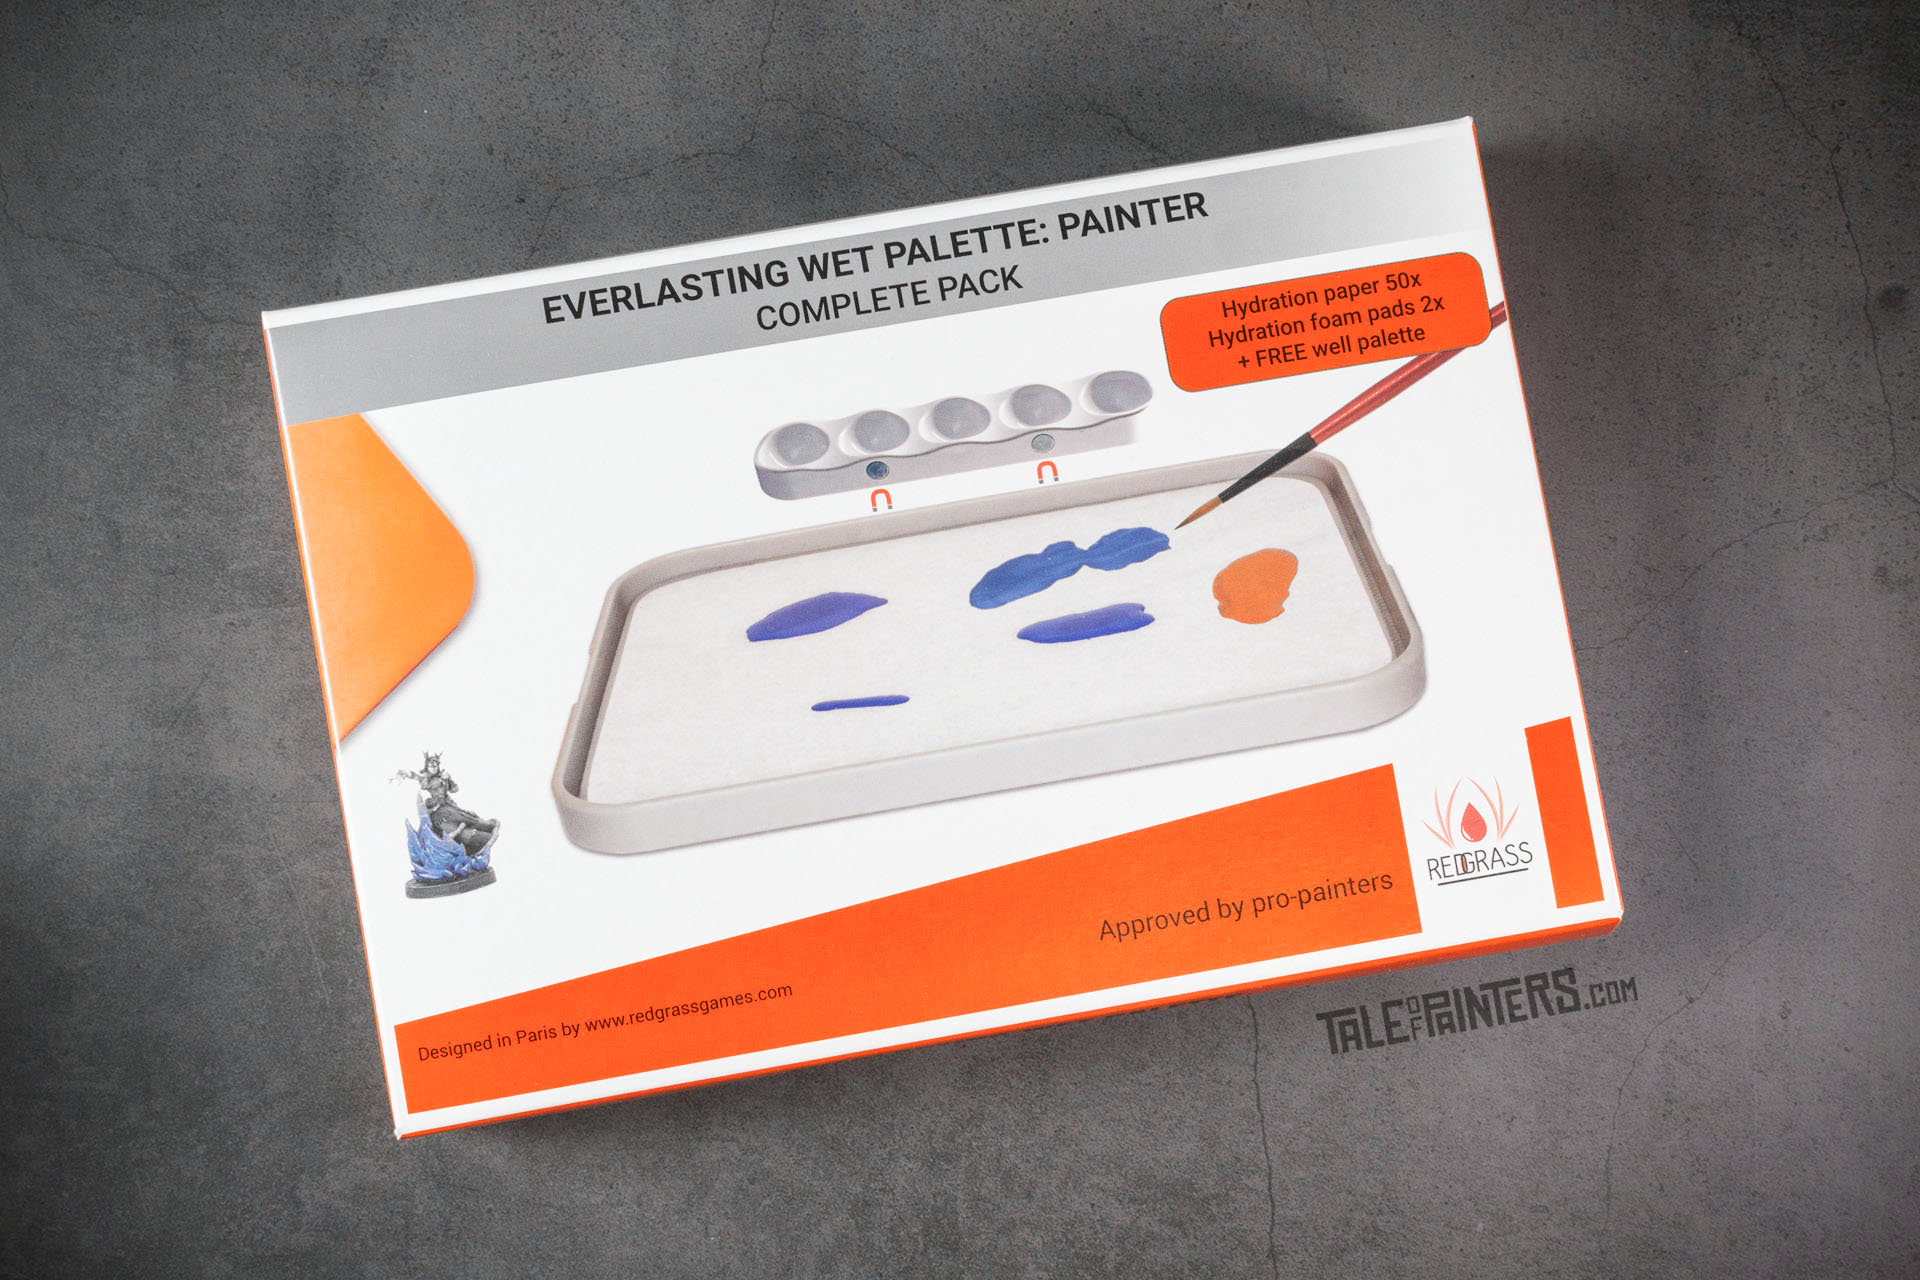 Review: Redgrass Games Everlasting Wet Palette Painter Edition Complete  Pack » Tale of Painters